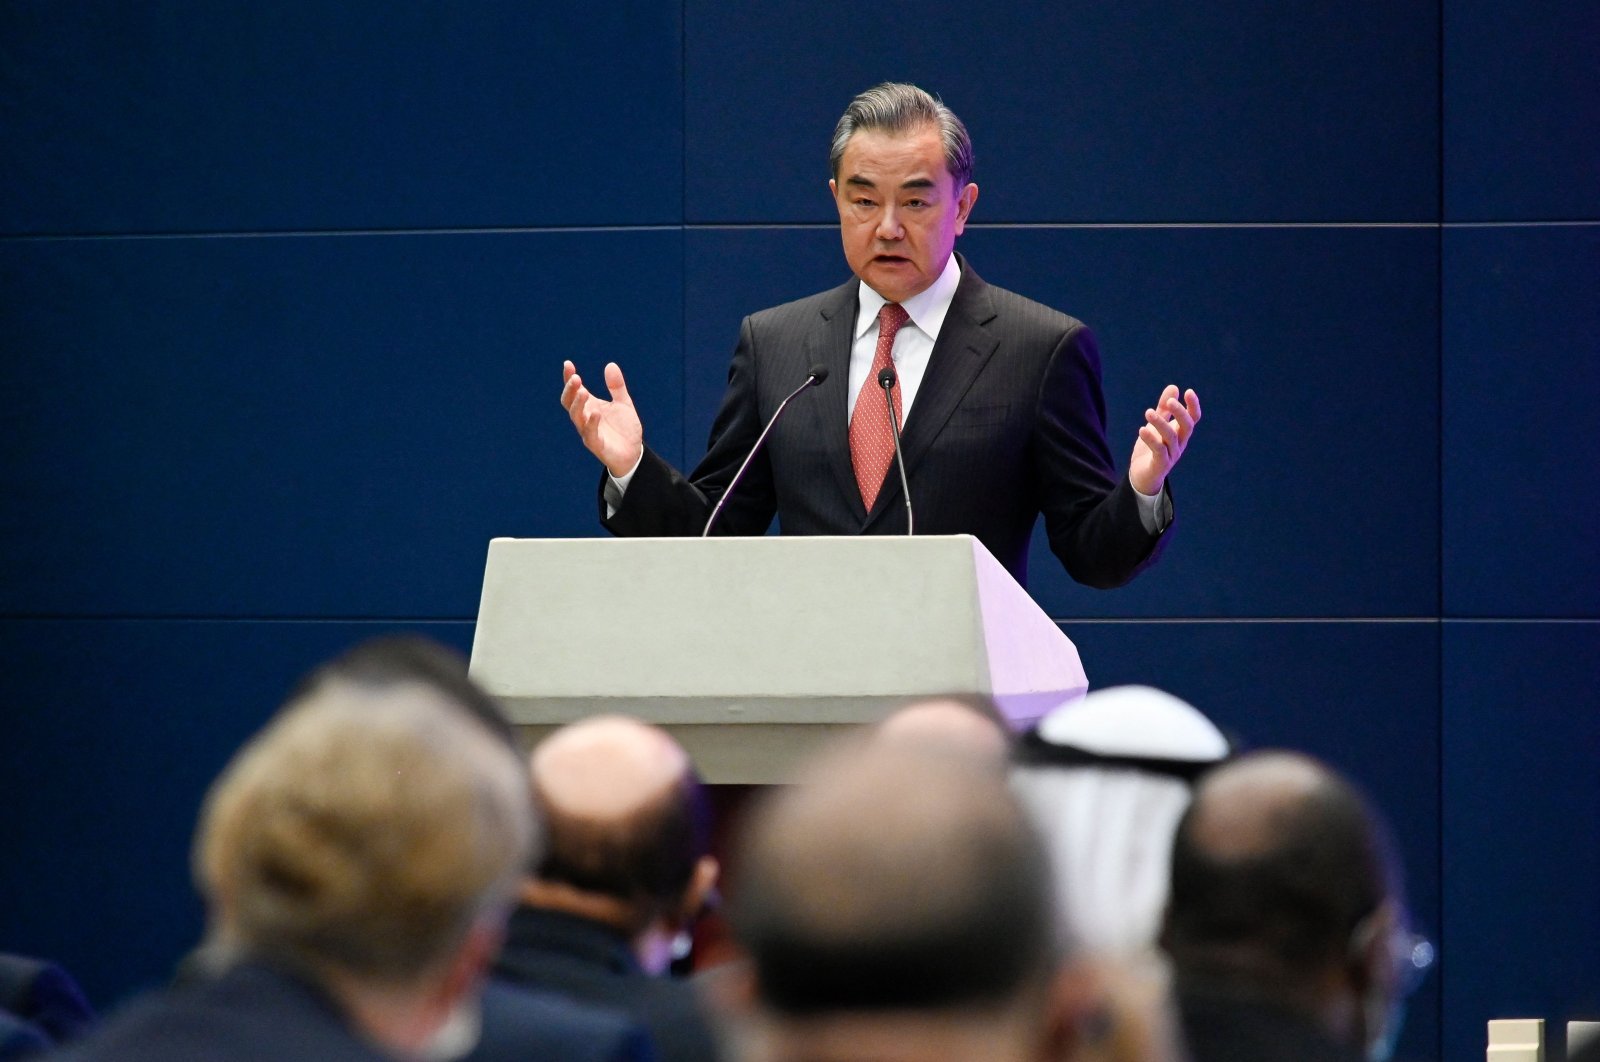 China's Foreign Minister Wang Yi speaks at a promotional event of Hubei province named "Reborn for New Glories" at the Chinese Foreign Ministry in Beijing, China, April 12, 2021. (AFP Photo)